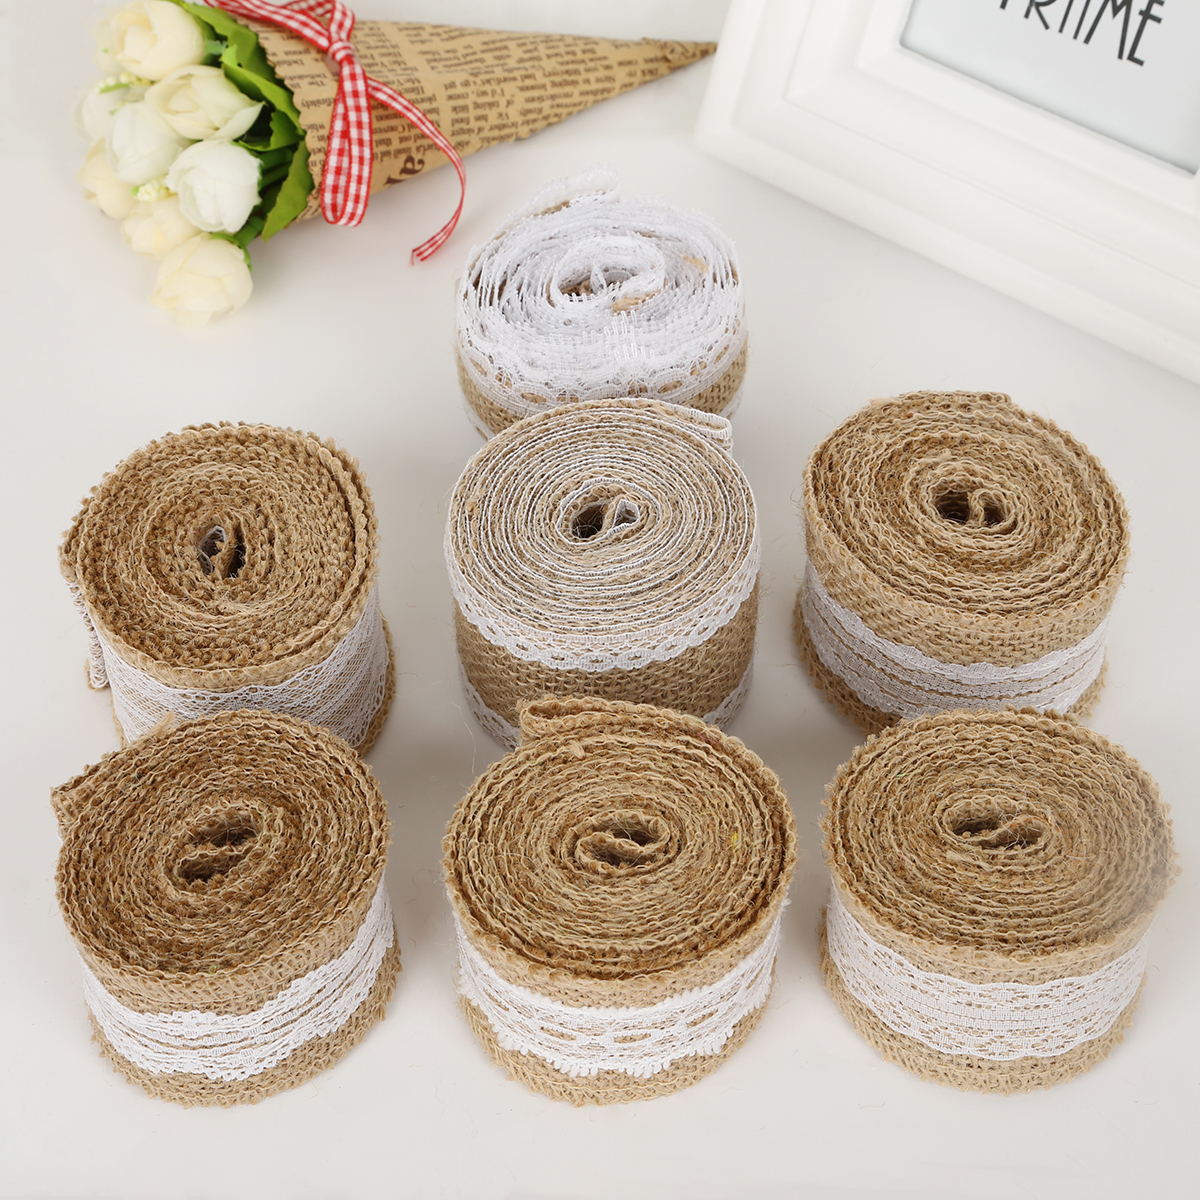 New Arrival vintage width 5cm Natural Jute Burlap Hessian Ribbon with Lace for countryside wedding&party decoration DIY Ribbon